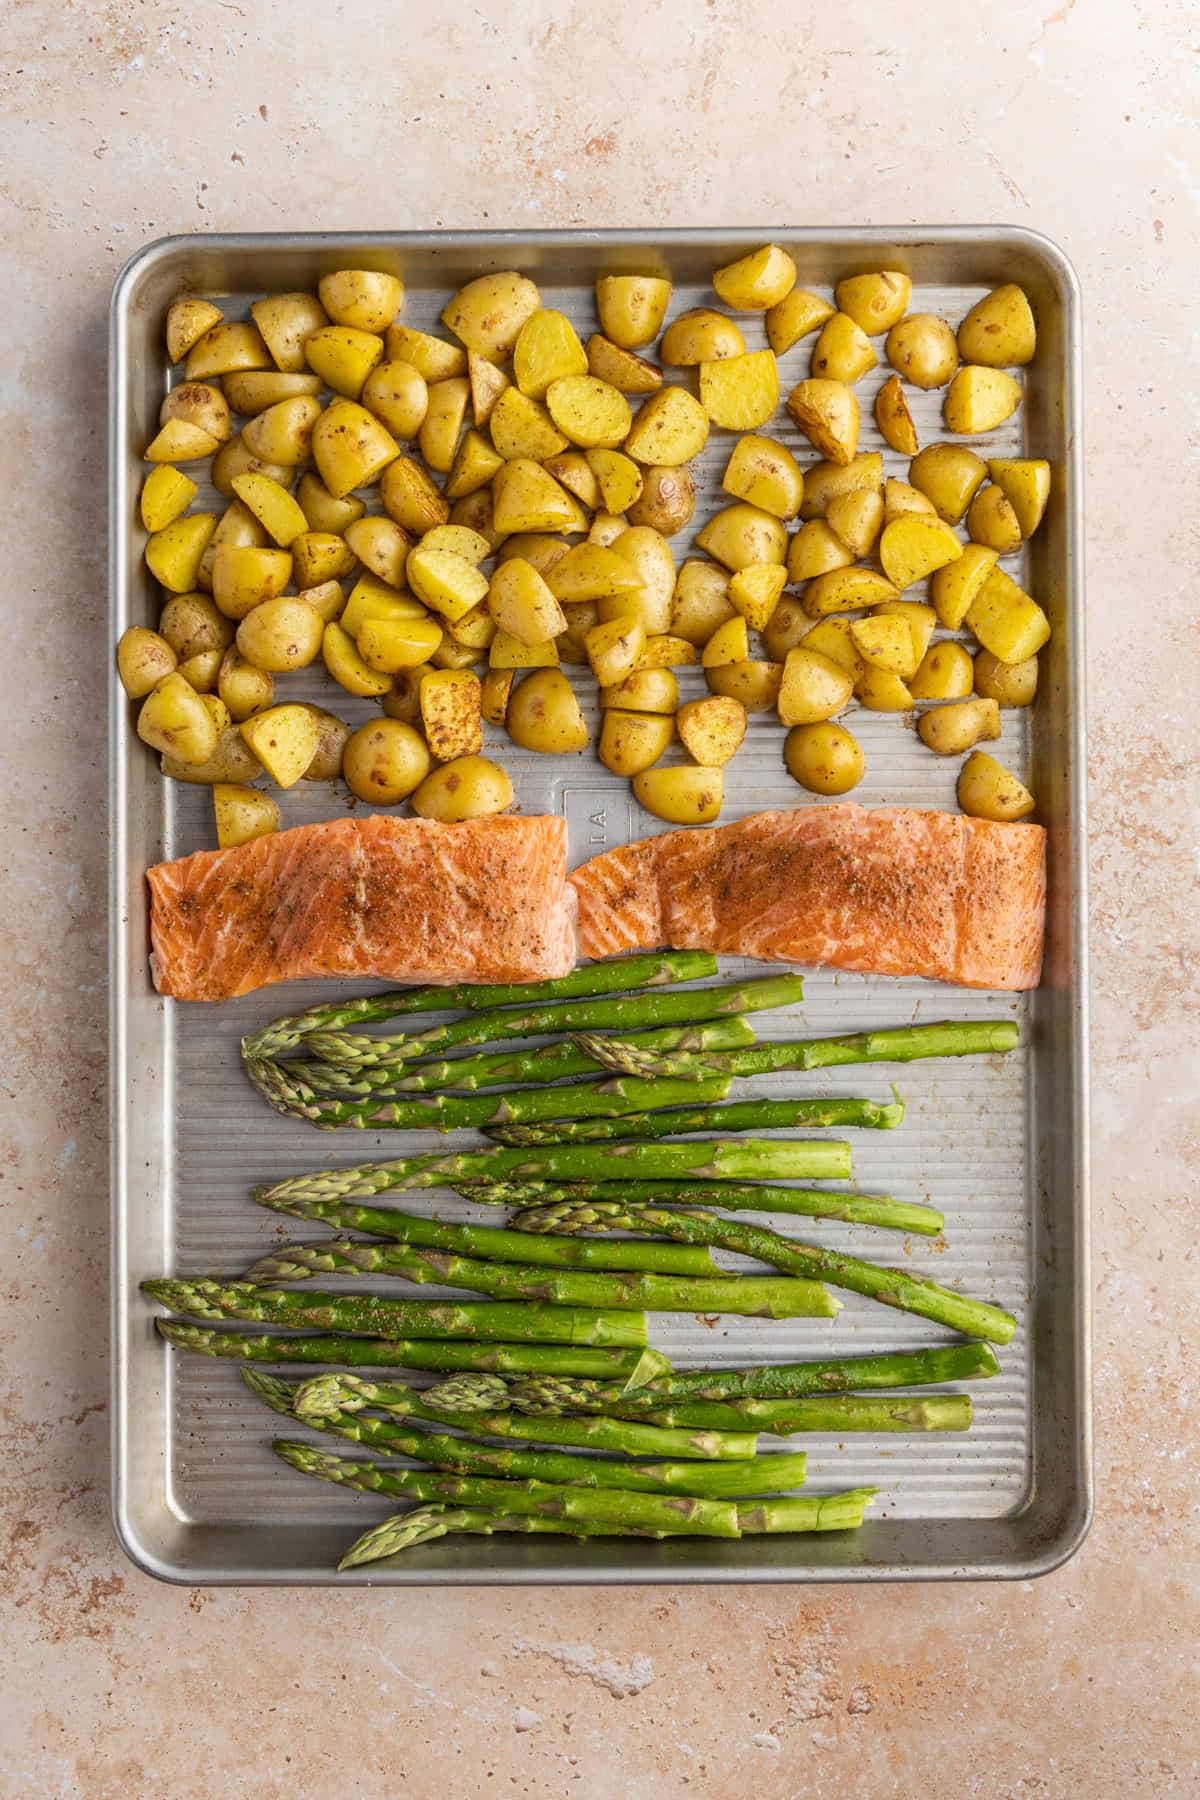 Salmon Asparagus and Potatoes on a sheet pan ready for the oven